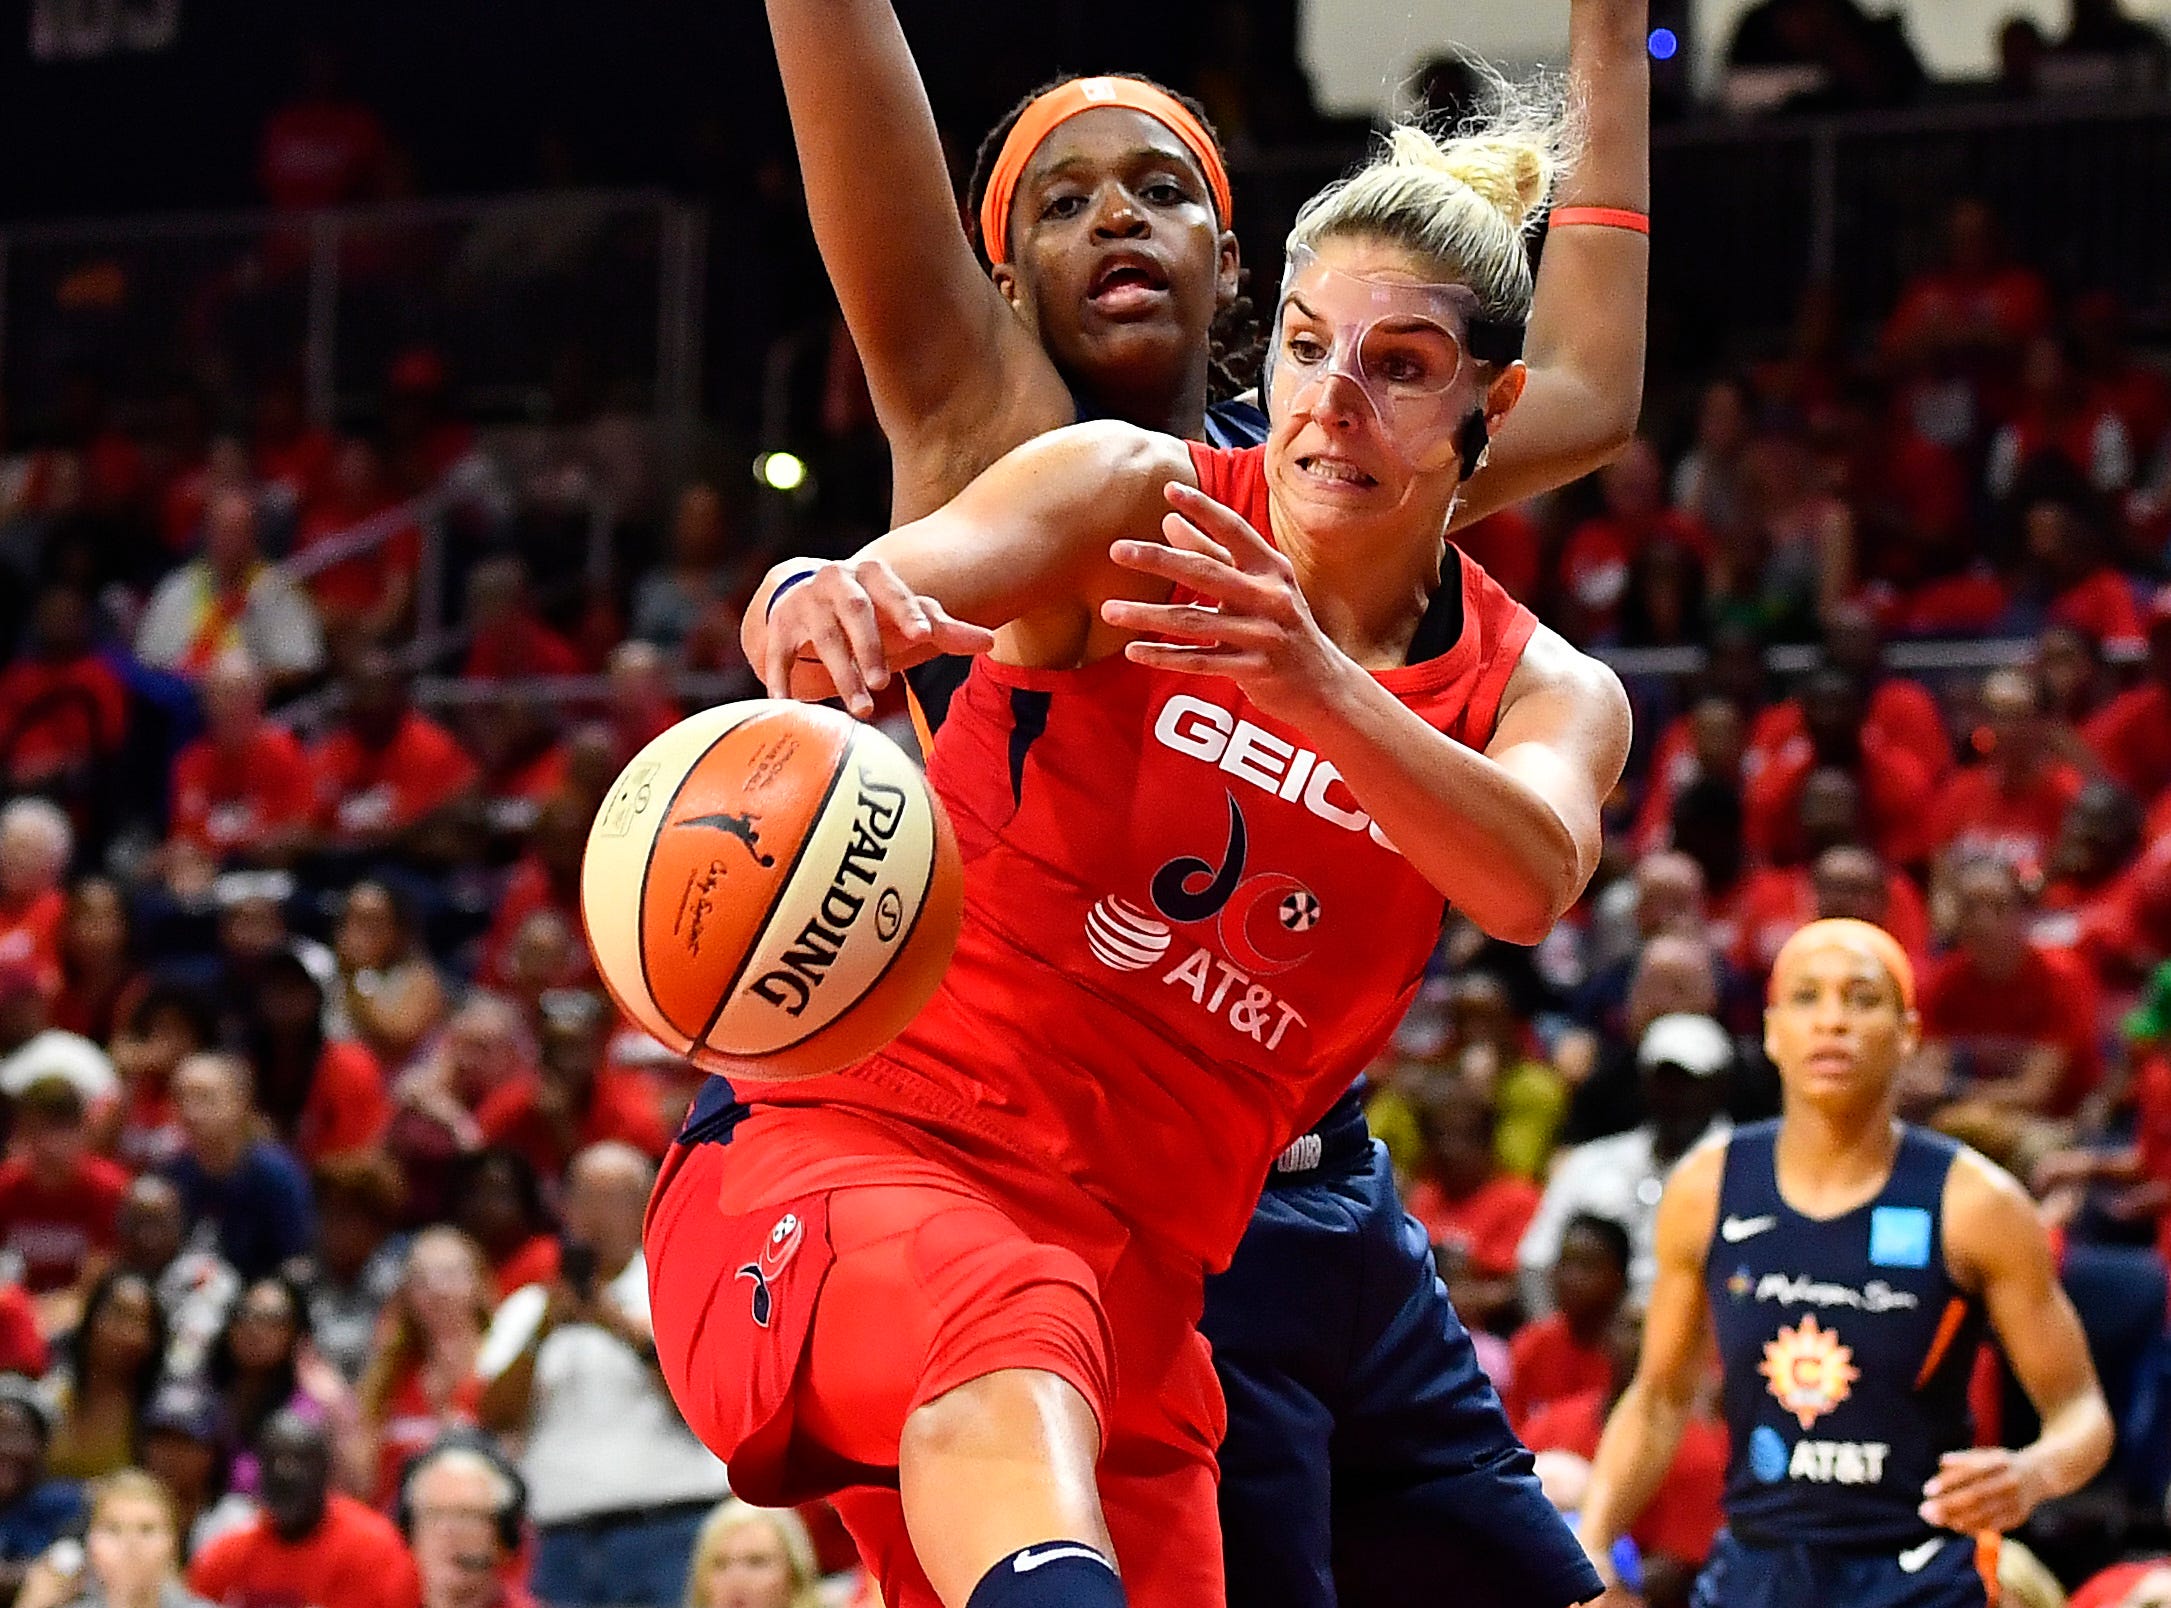 Top images from the 2019 WNBA Finals between the Washington Mystics and